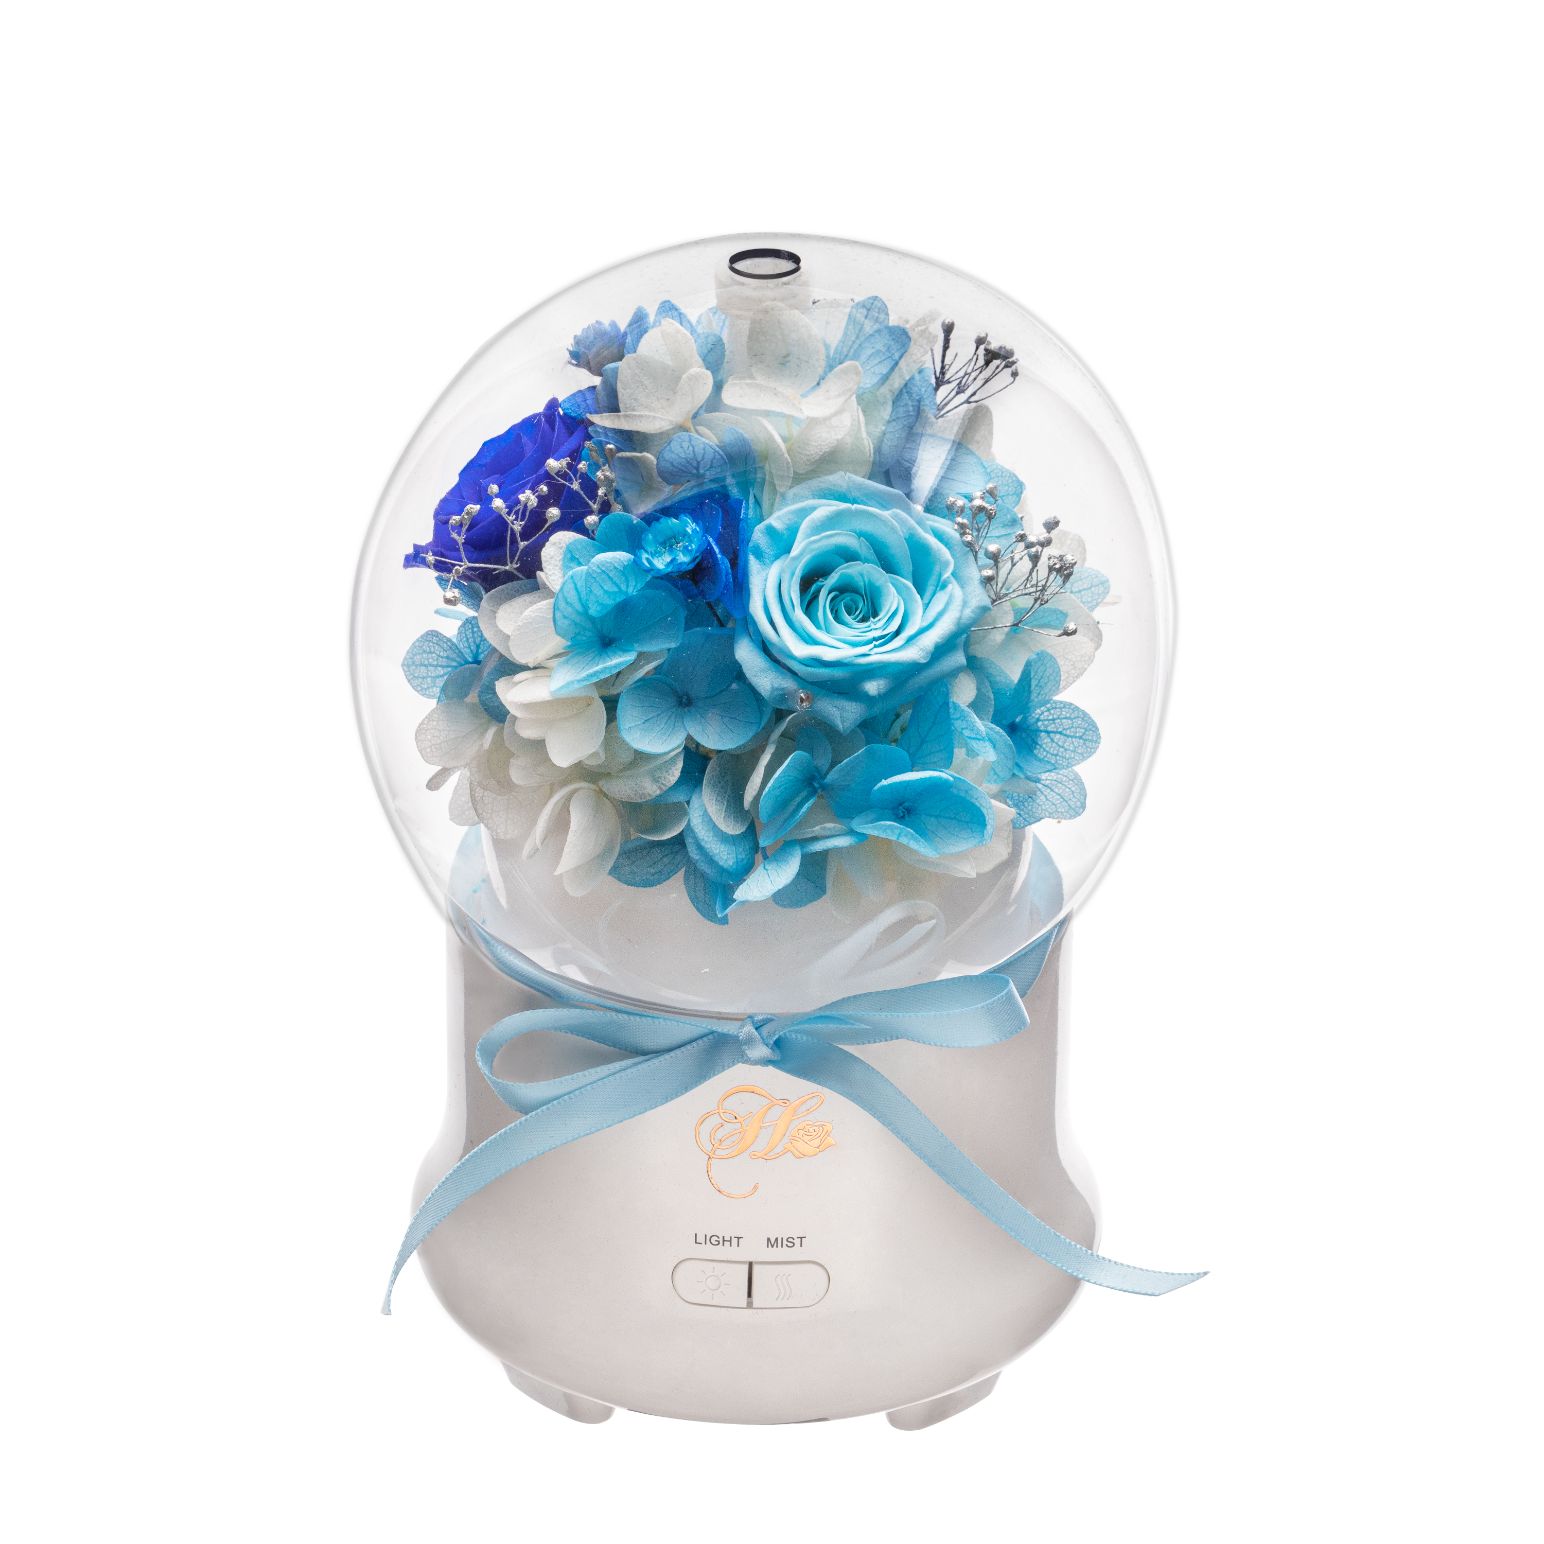 Her Rose Rose Humidifier (Blue + White)